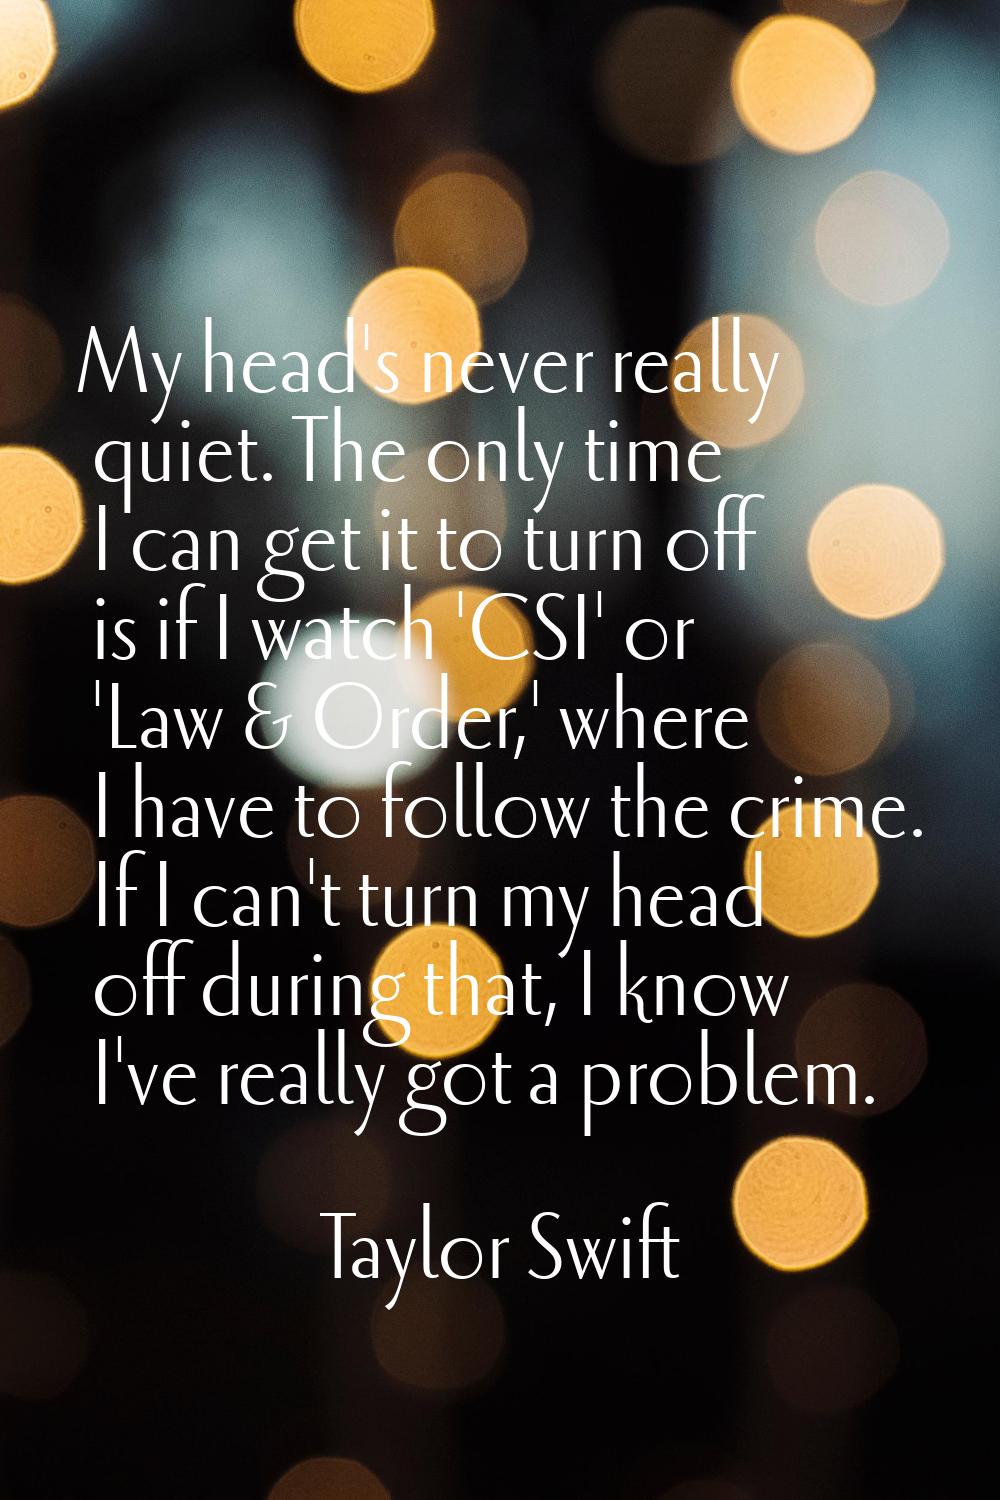 My head's never really quiet. The only time I can get it to turn off is if I watch 'CSI' or 'Law & 